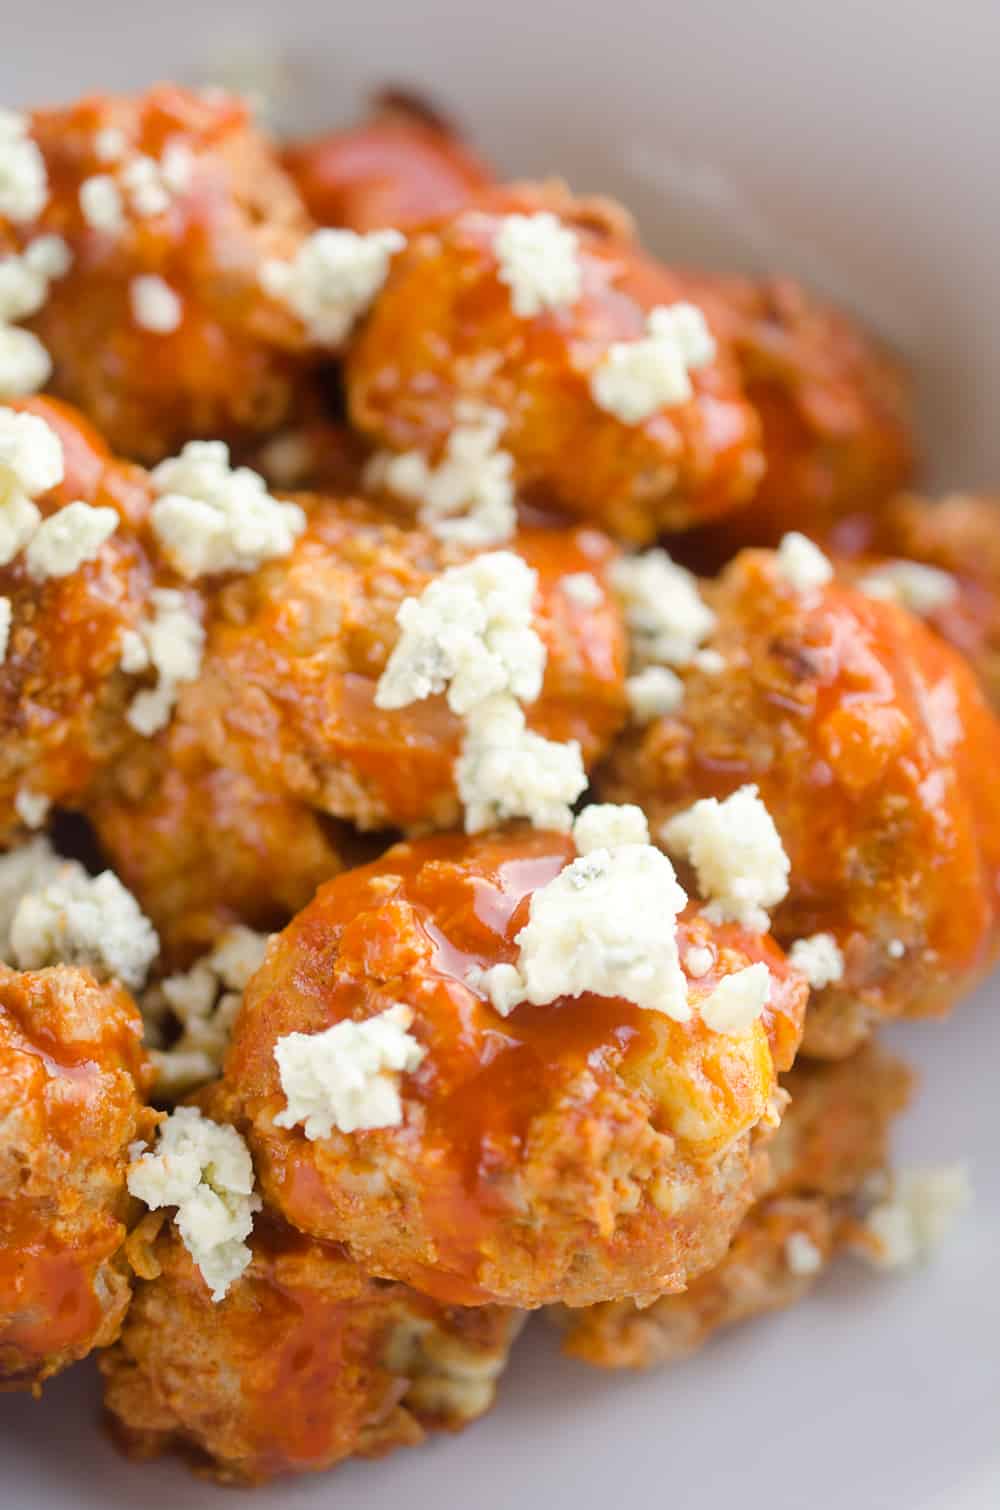 Light Crock Pot Buffalo Turkey Meatballs are an easy recipe made in your slow cooker bursting with bold flavor from spicy buffalo sauce and bleu cheese crumbles! Serve them as an appetizer on game day or pair them with a side of rice and veggies for a flavorful dinner.